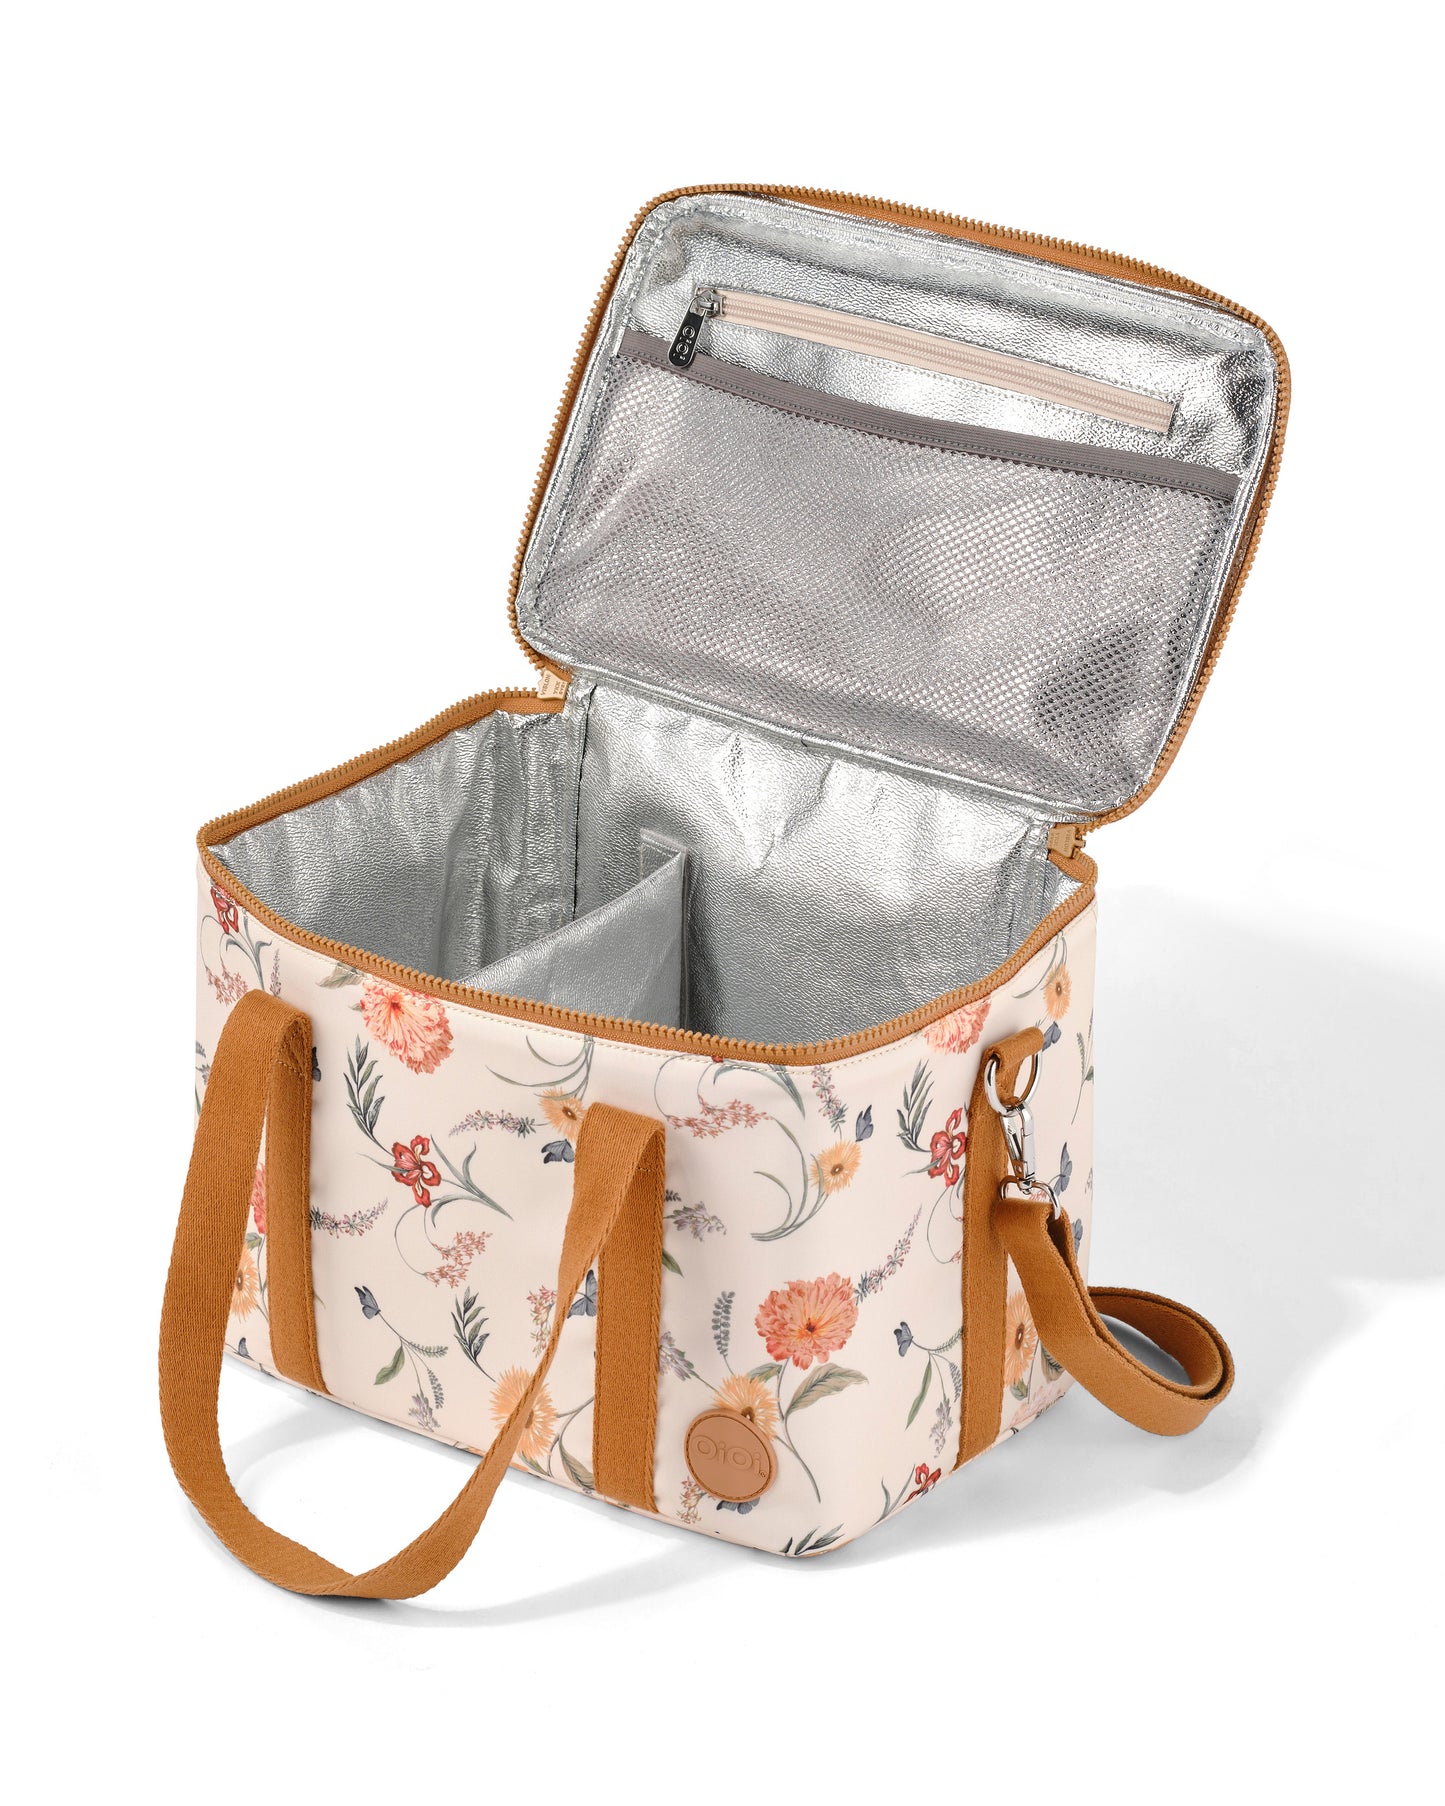 Maxi Insulated Lunch Bag- Wildflower